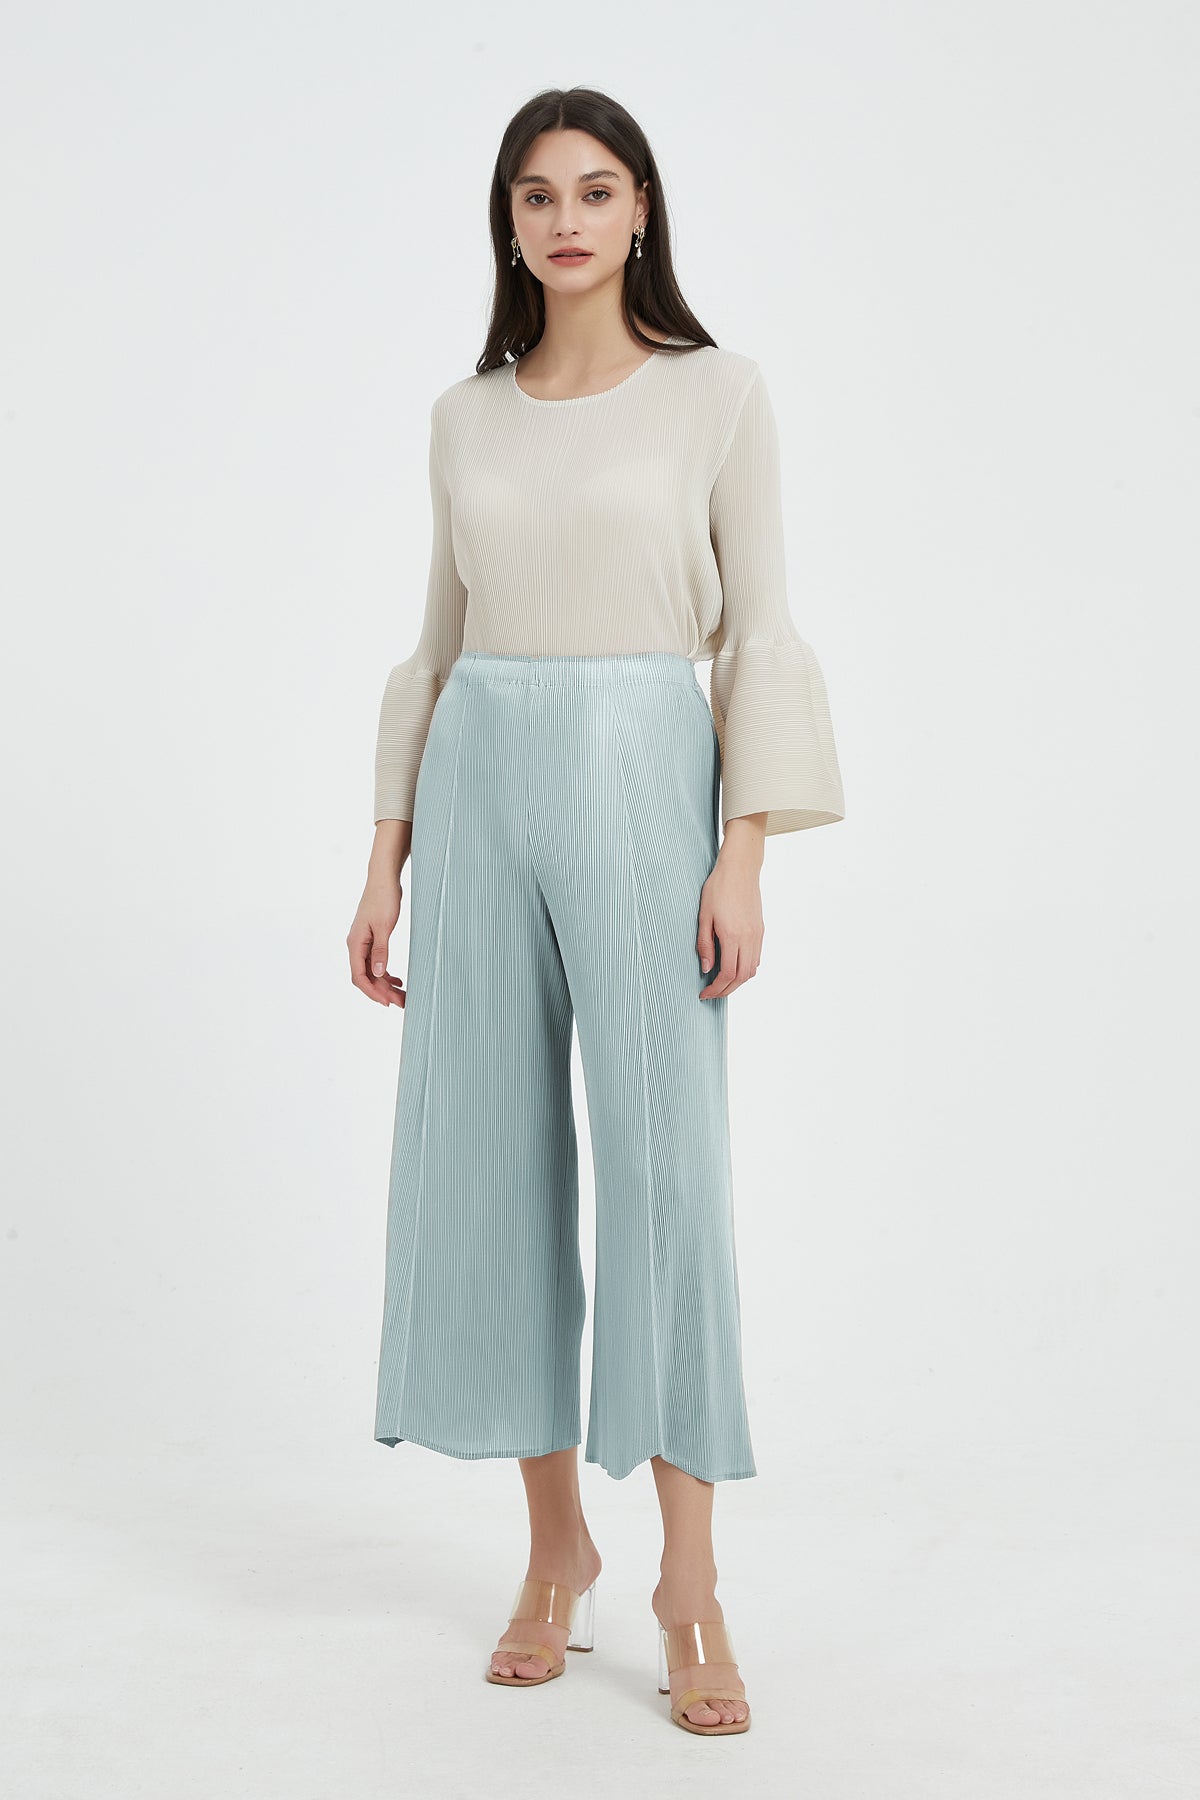 SKYE, Fiorella Pleated Pants, Affordable Quiet Luxury